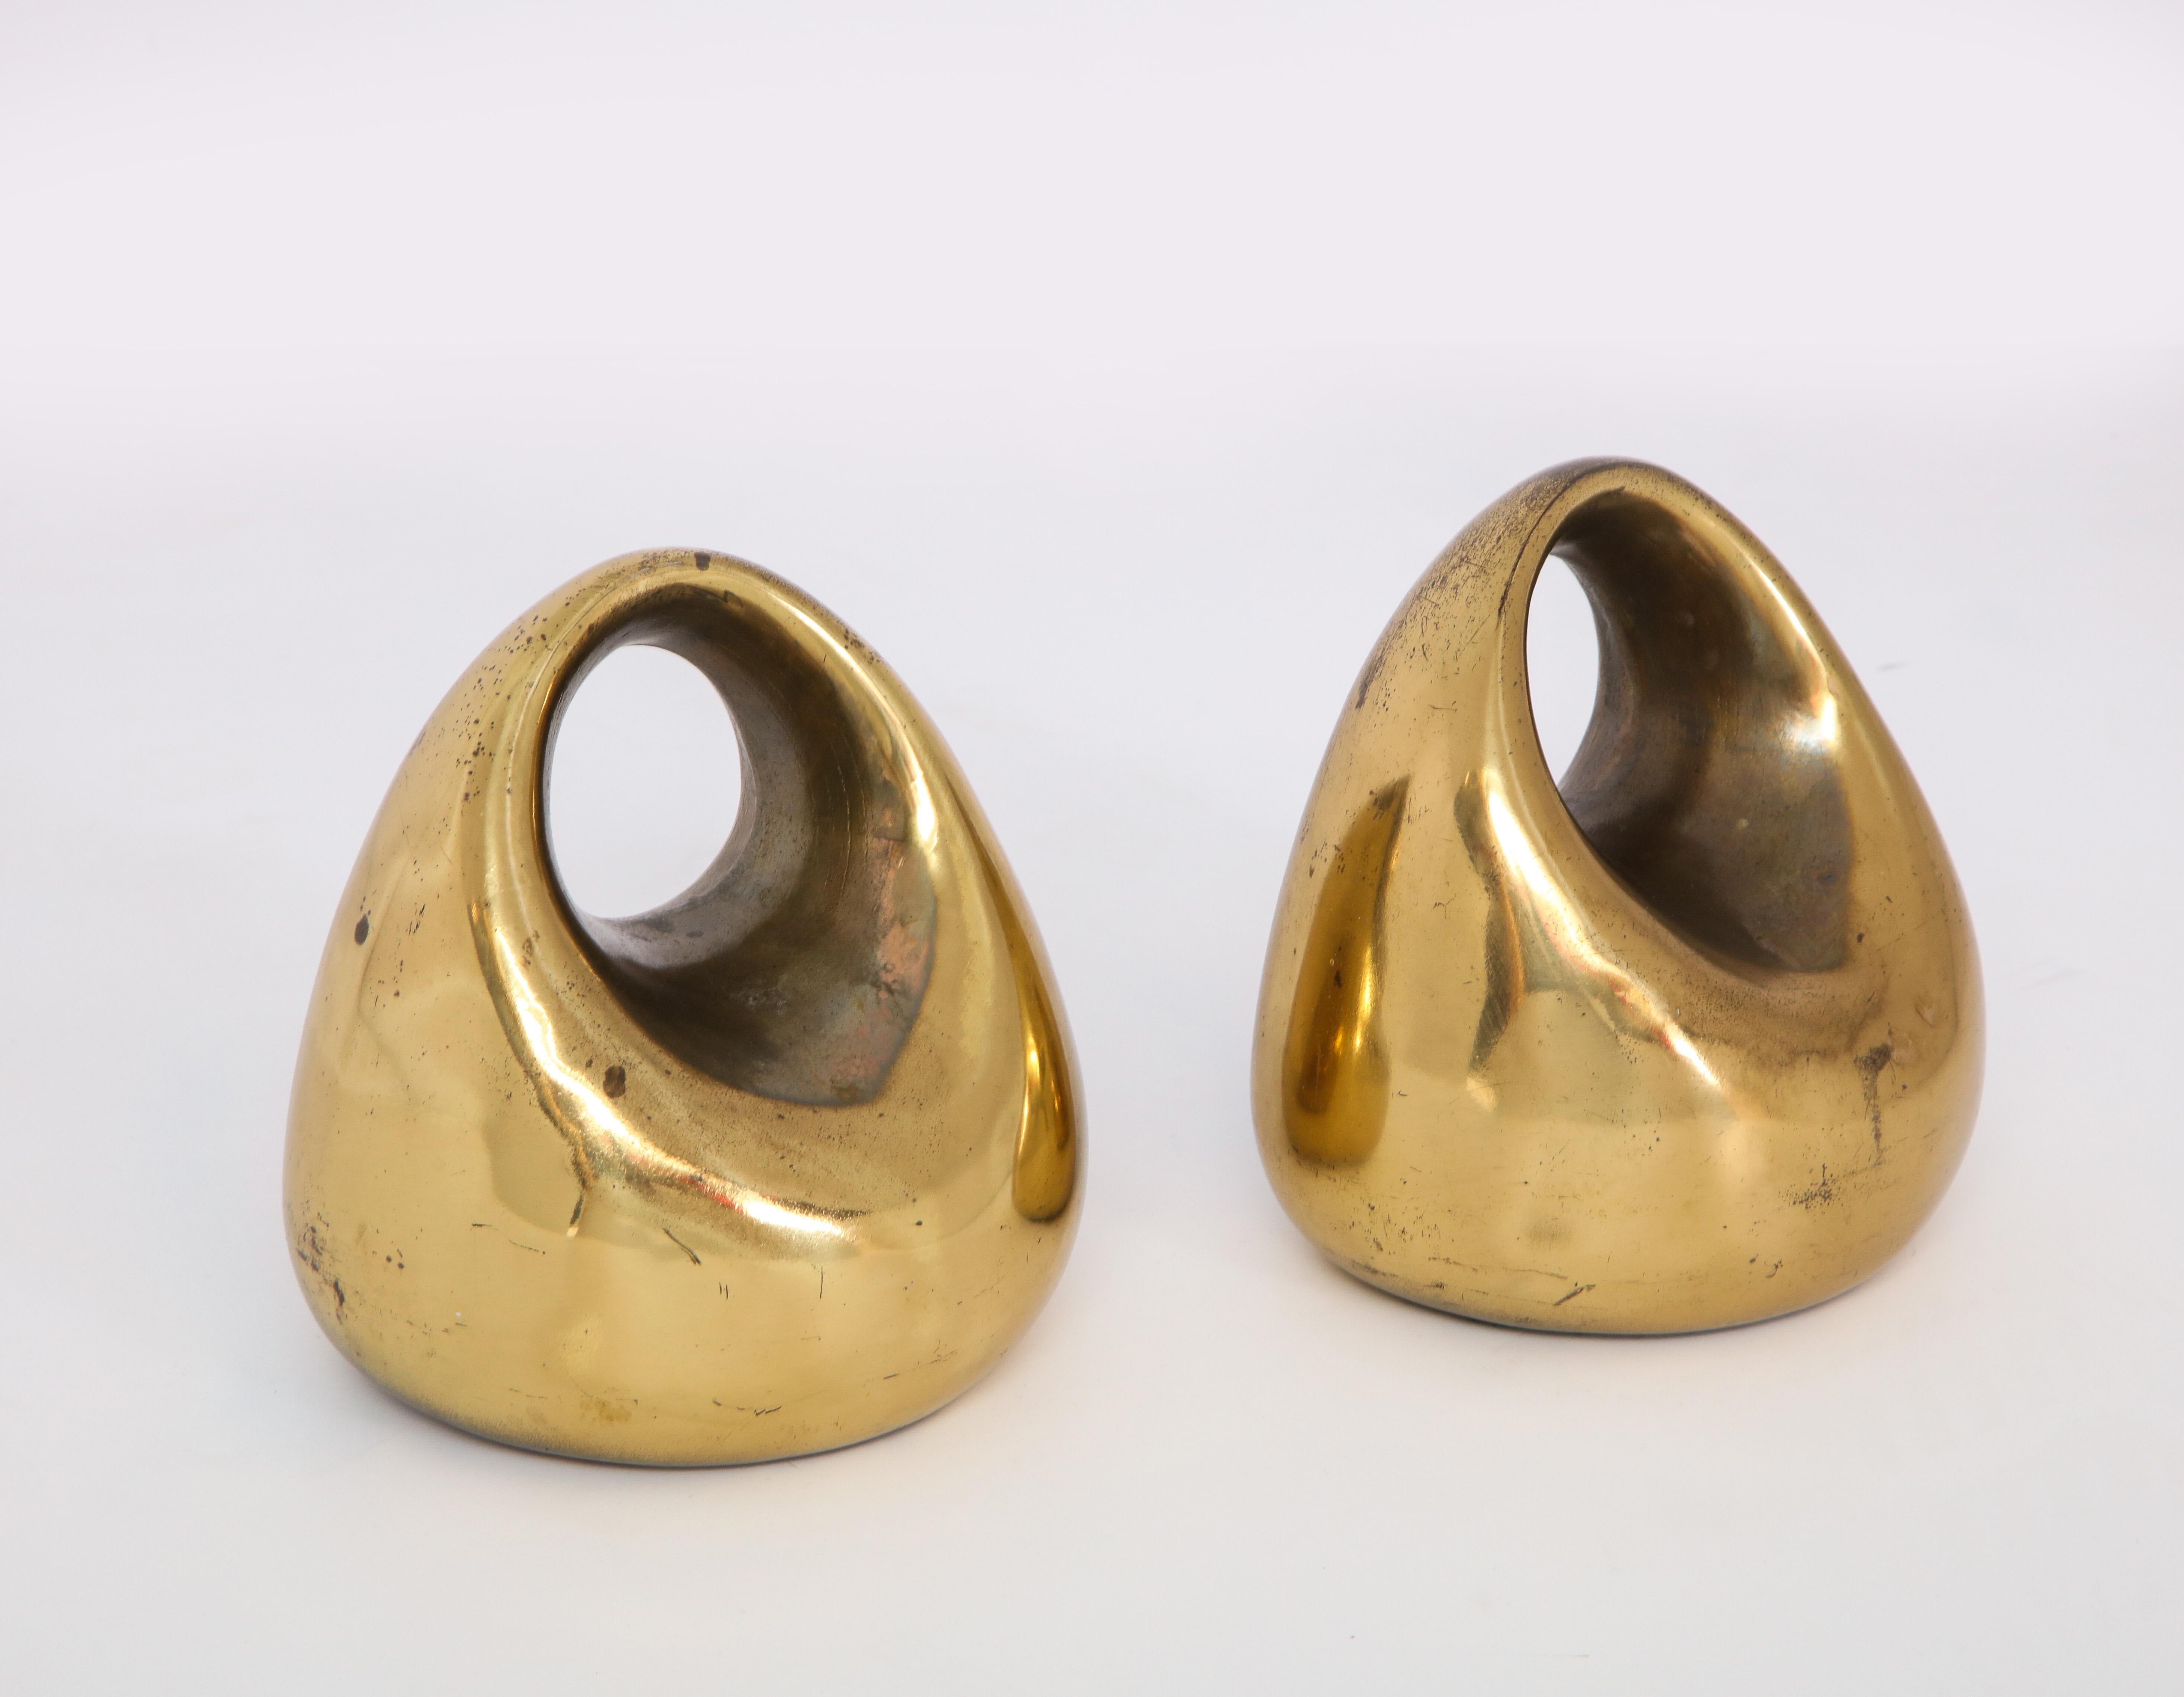 Decorative brass bookends by Ben Seibel for Jenfred-Ware, circa 1960.